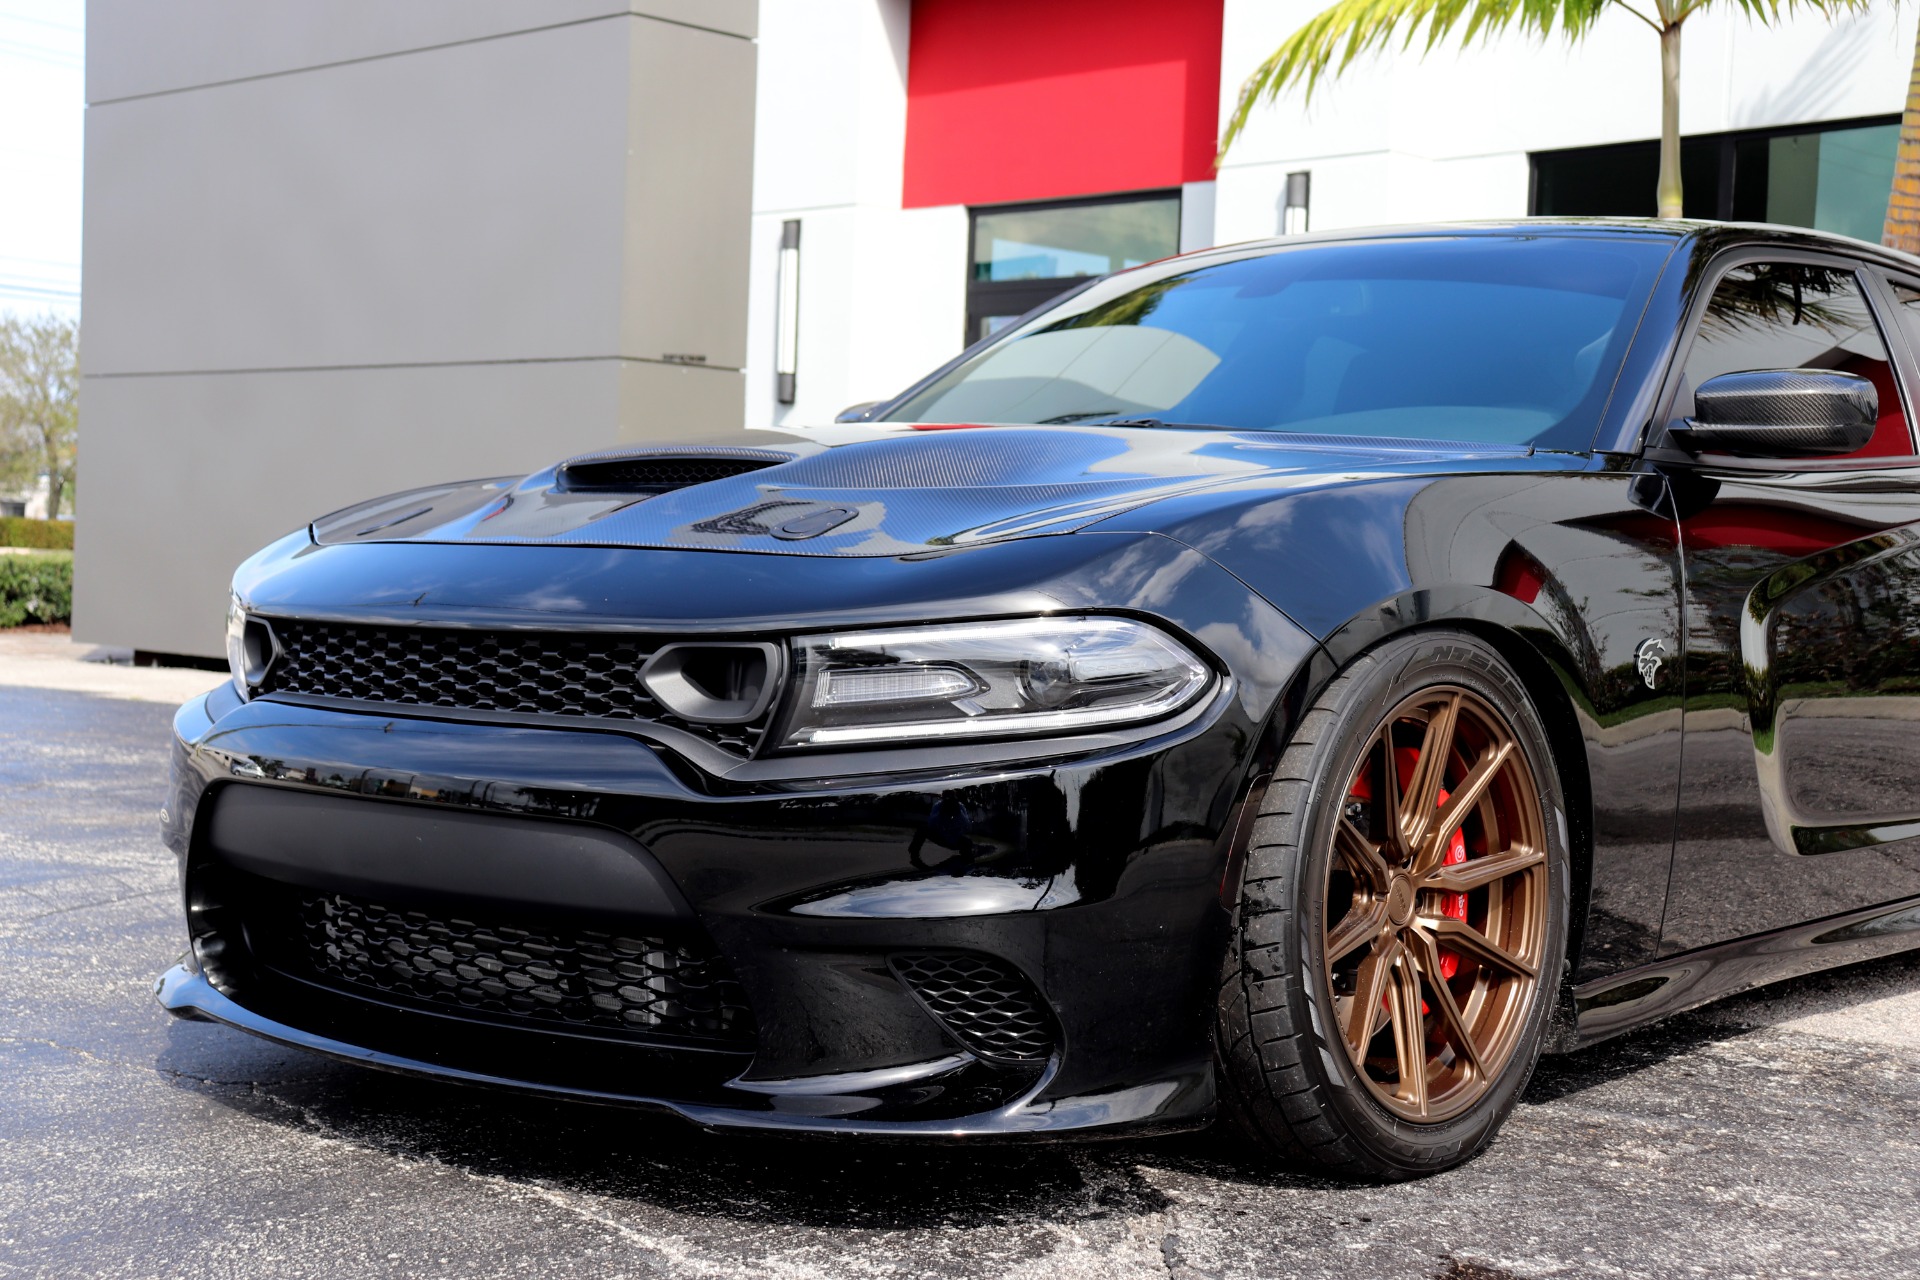 Used 2018 Dodge Charger Srt Hellcat For Sale 69900 Marino